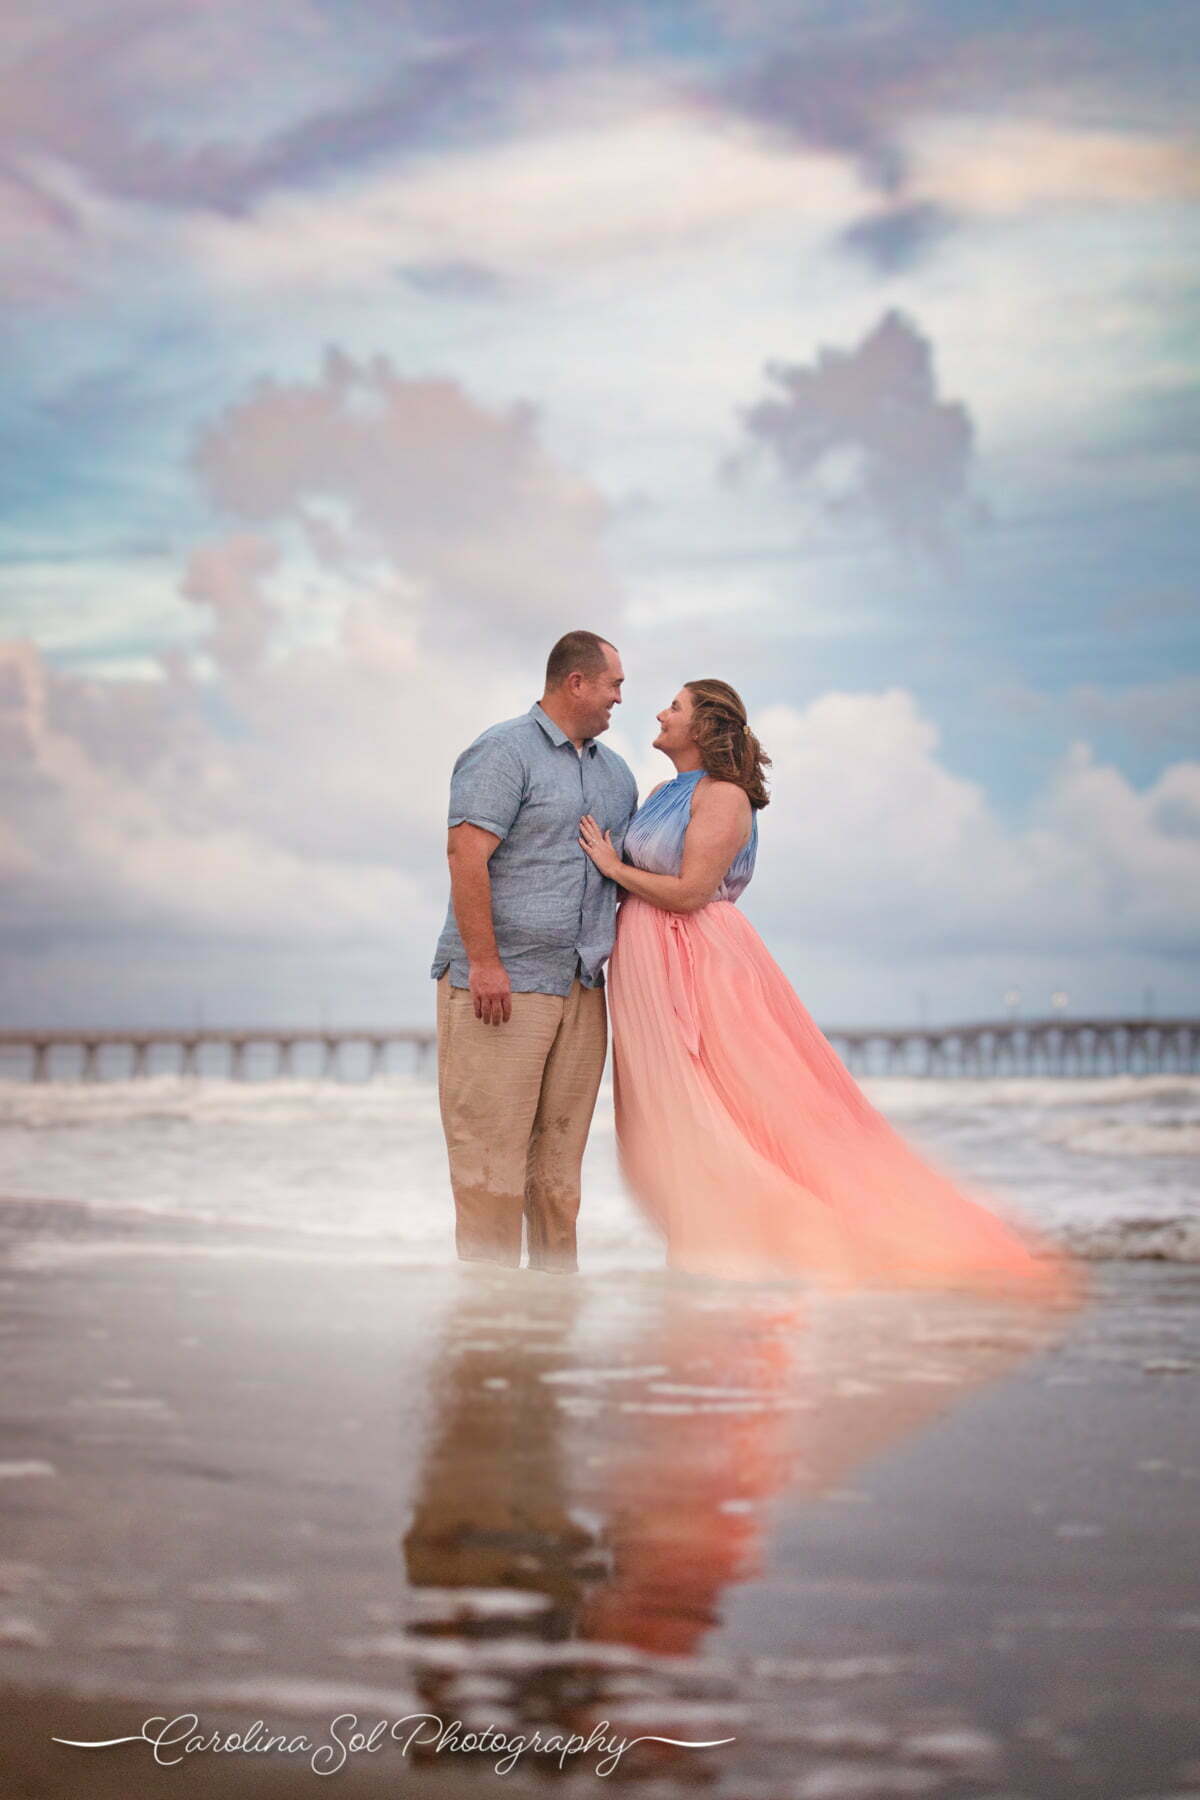 Sunset beach pregnancy announcement after successful ivf treatment.